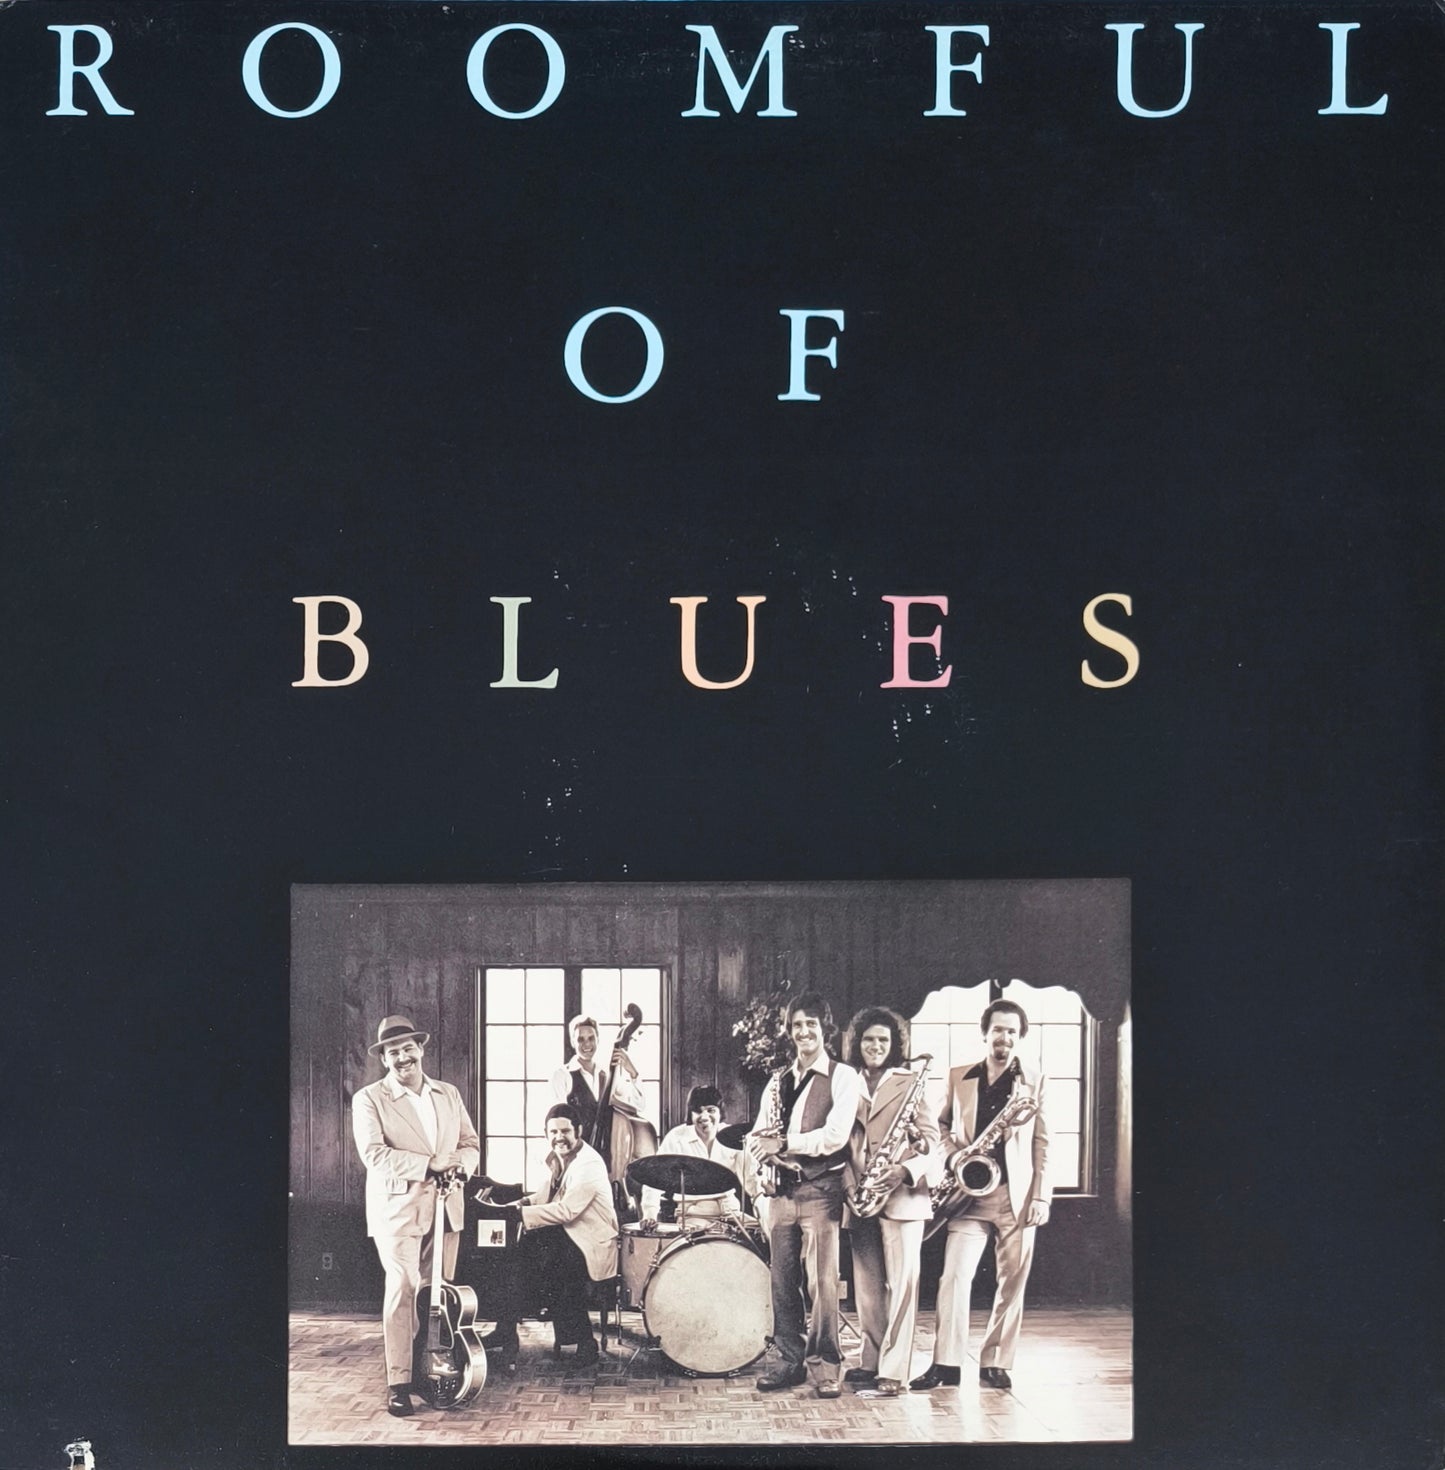 ROOMFUL OF BLUES - Roomful Of Blues